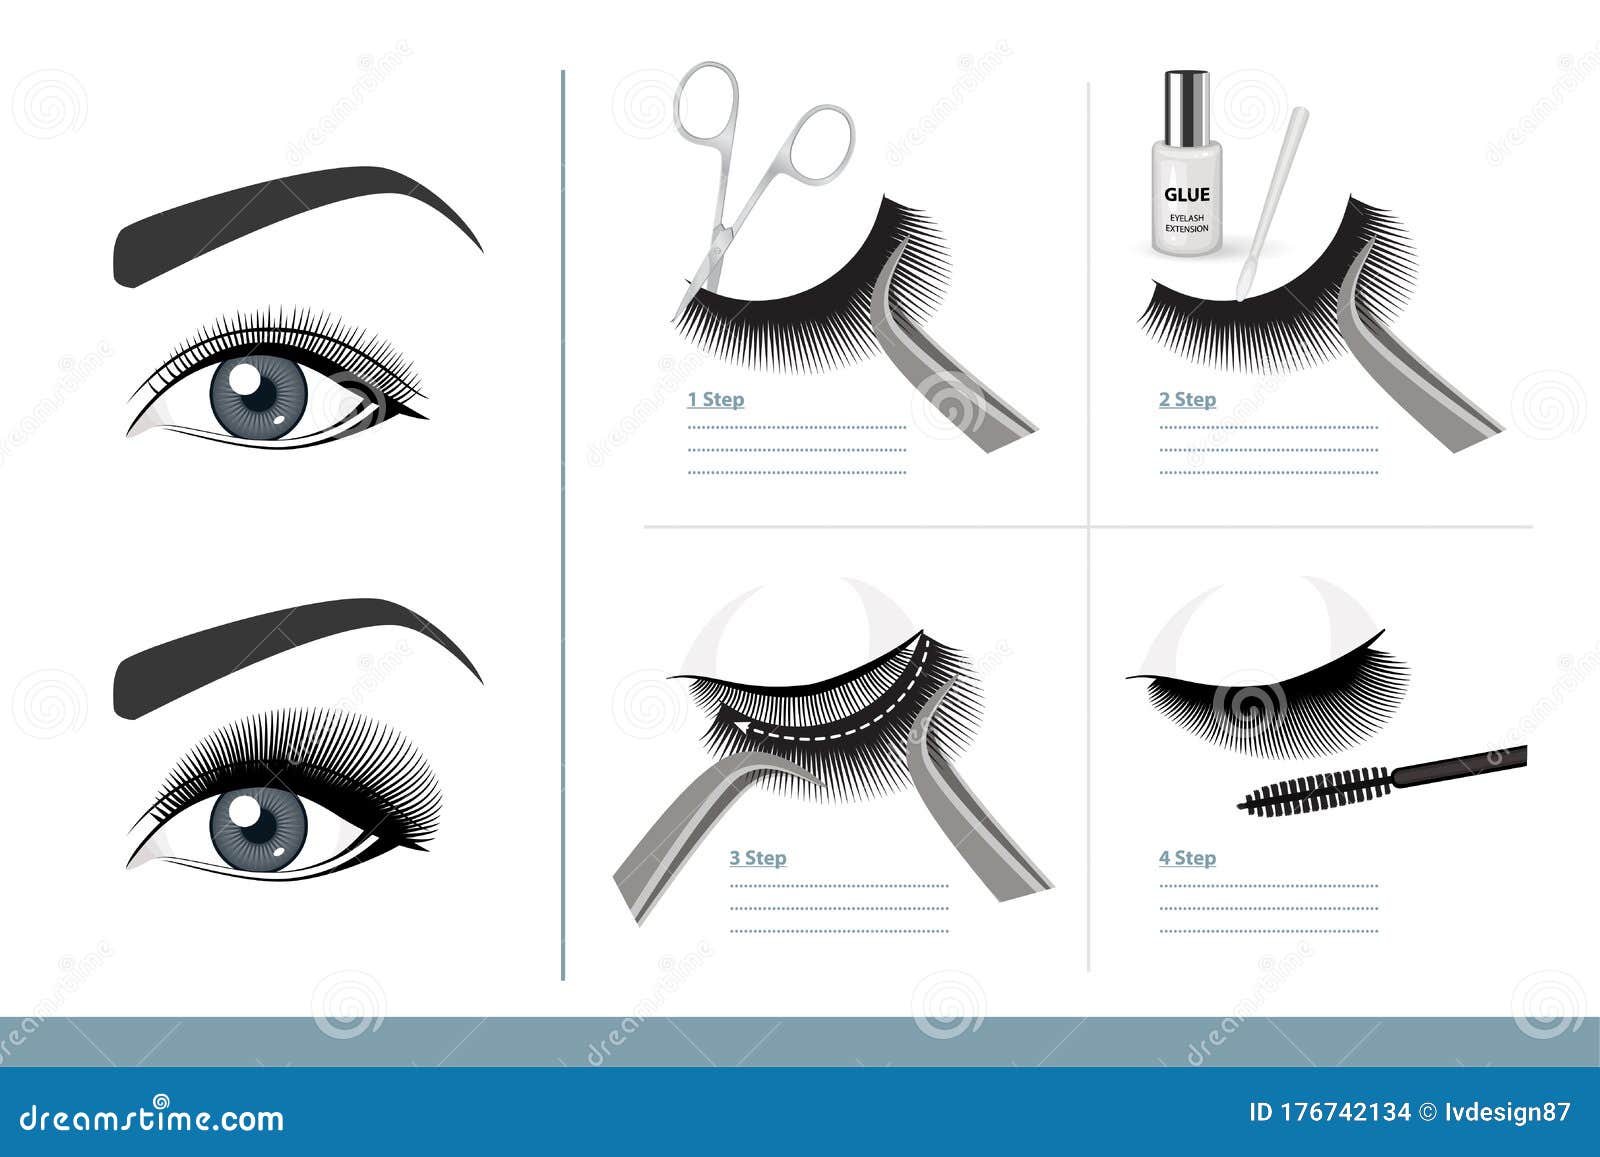 How To Apply False Eyelashes Step By Step Properly Full Tutorial On Application Guide Stock